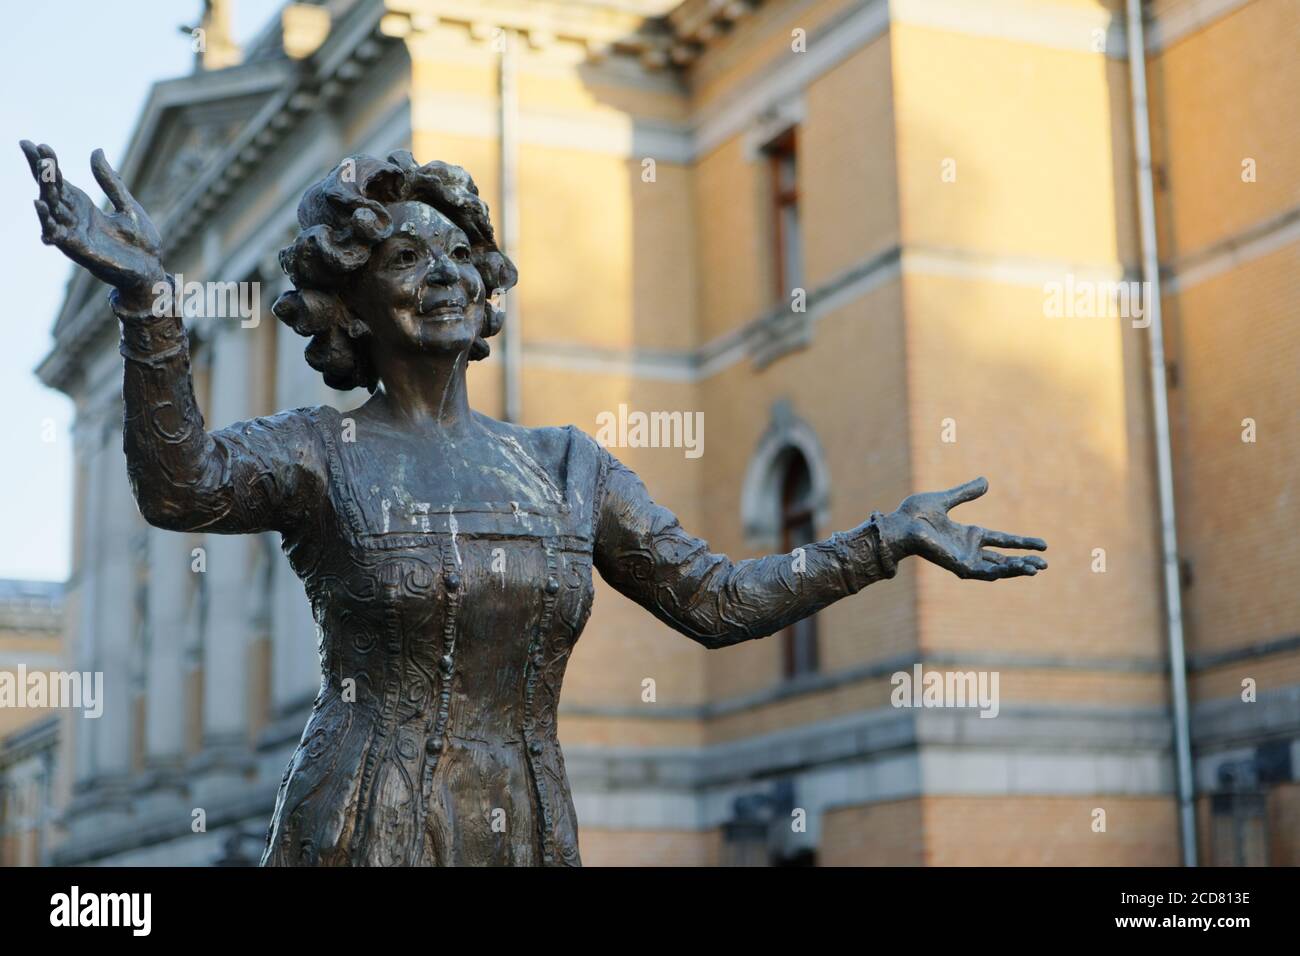 Monument to Norwegian actress Wenche Foss at the National Theatre in Oslo, Norway Stock Photo